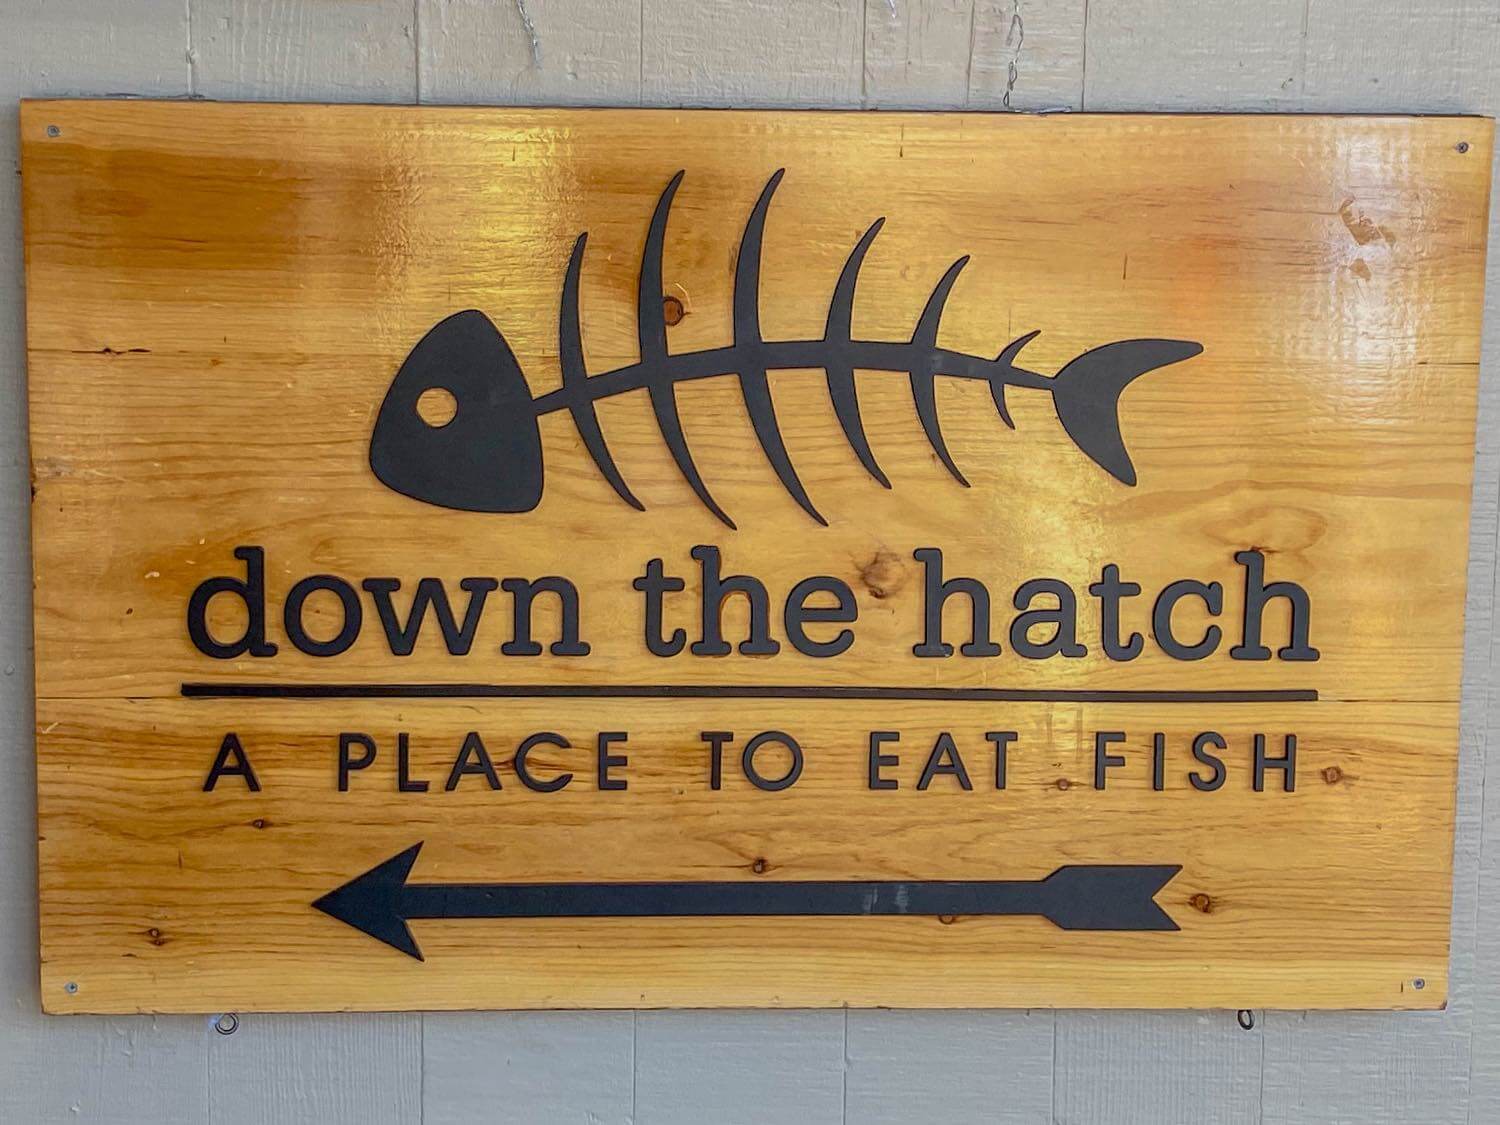 Down the Hatch restaurant in Lahaina, Maui